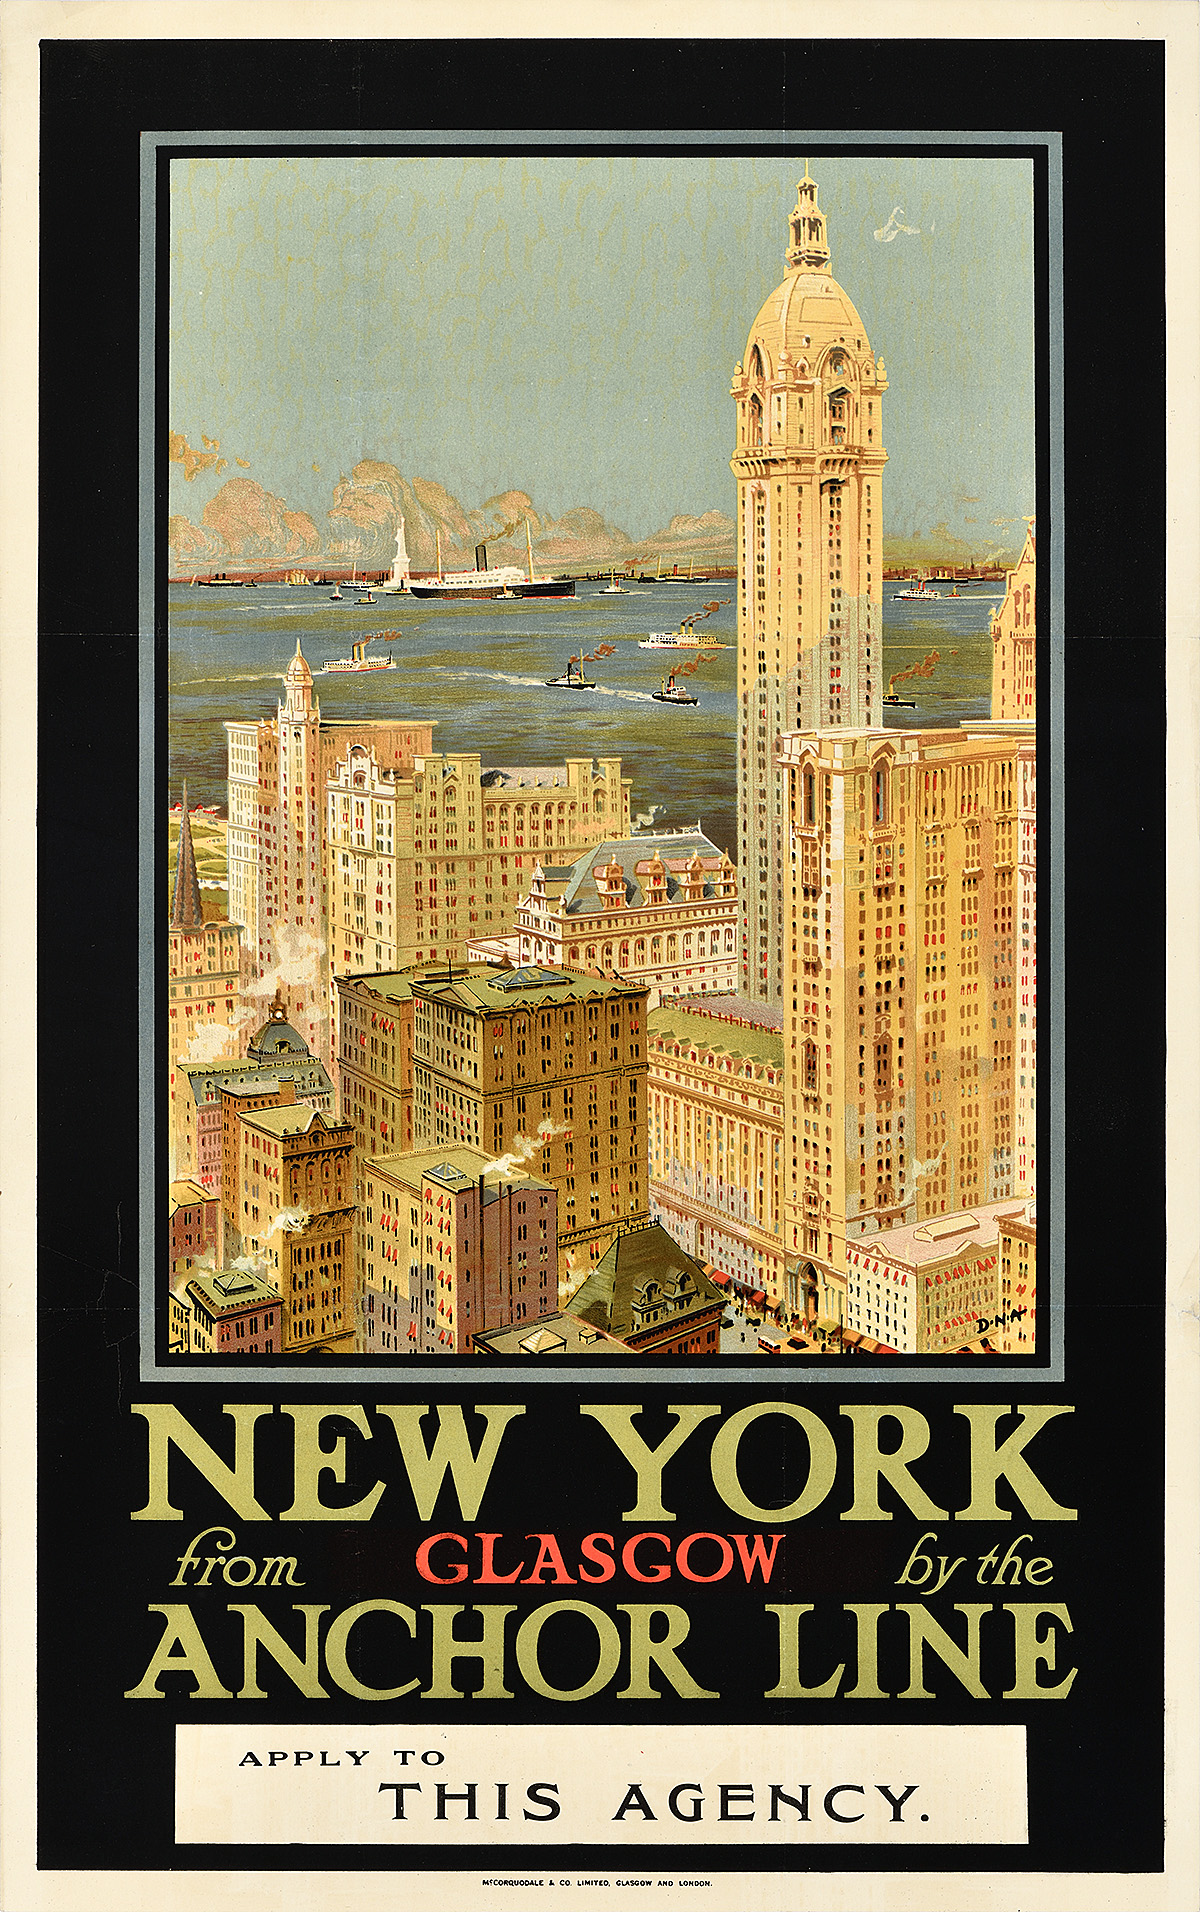 A poster of a series of buildings with golden tints in front of a body of water with a boat on it.